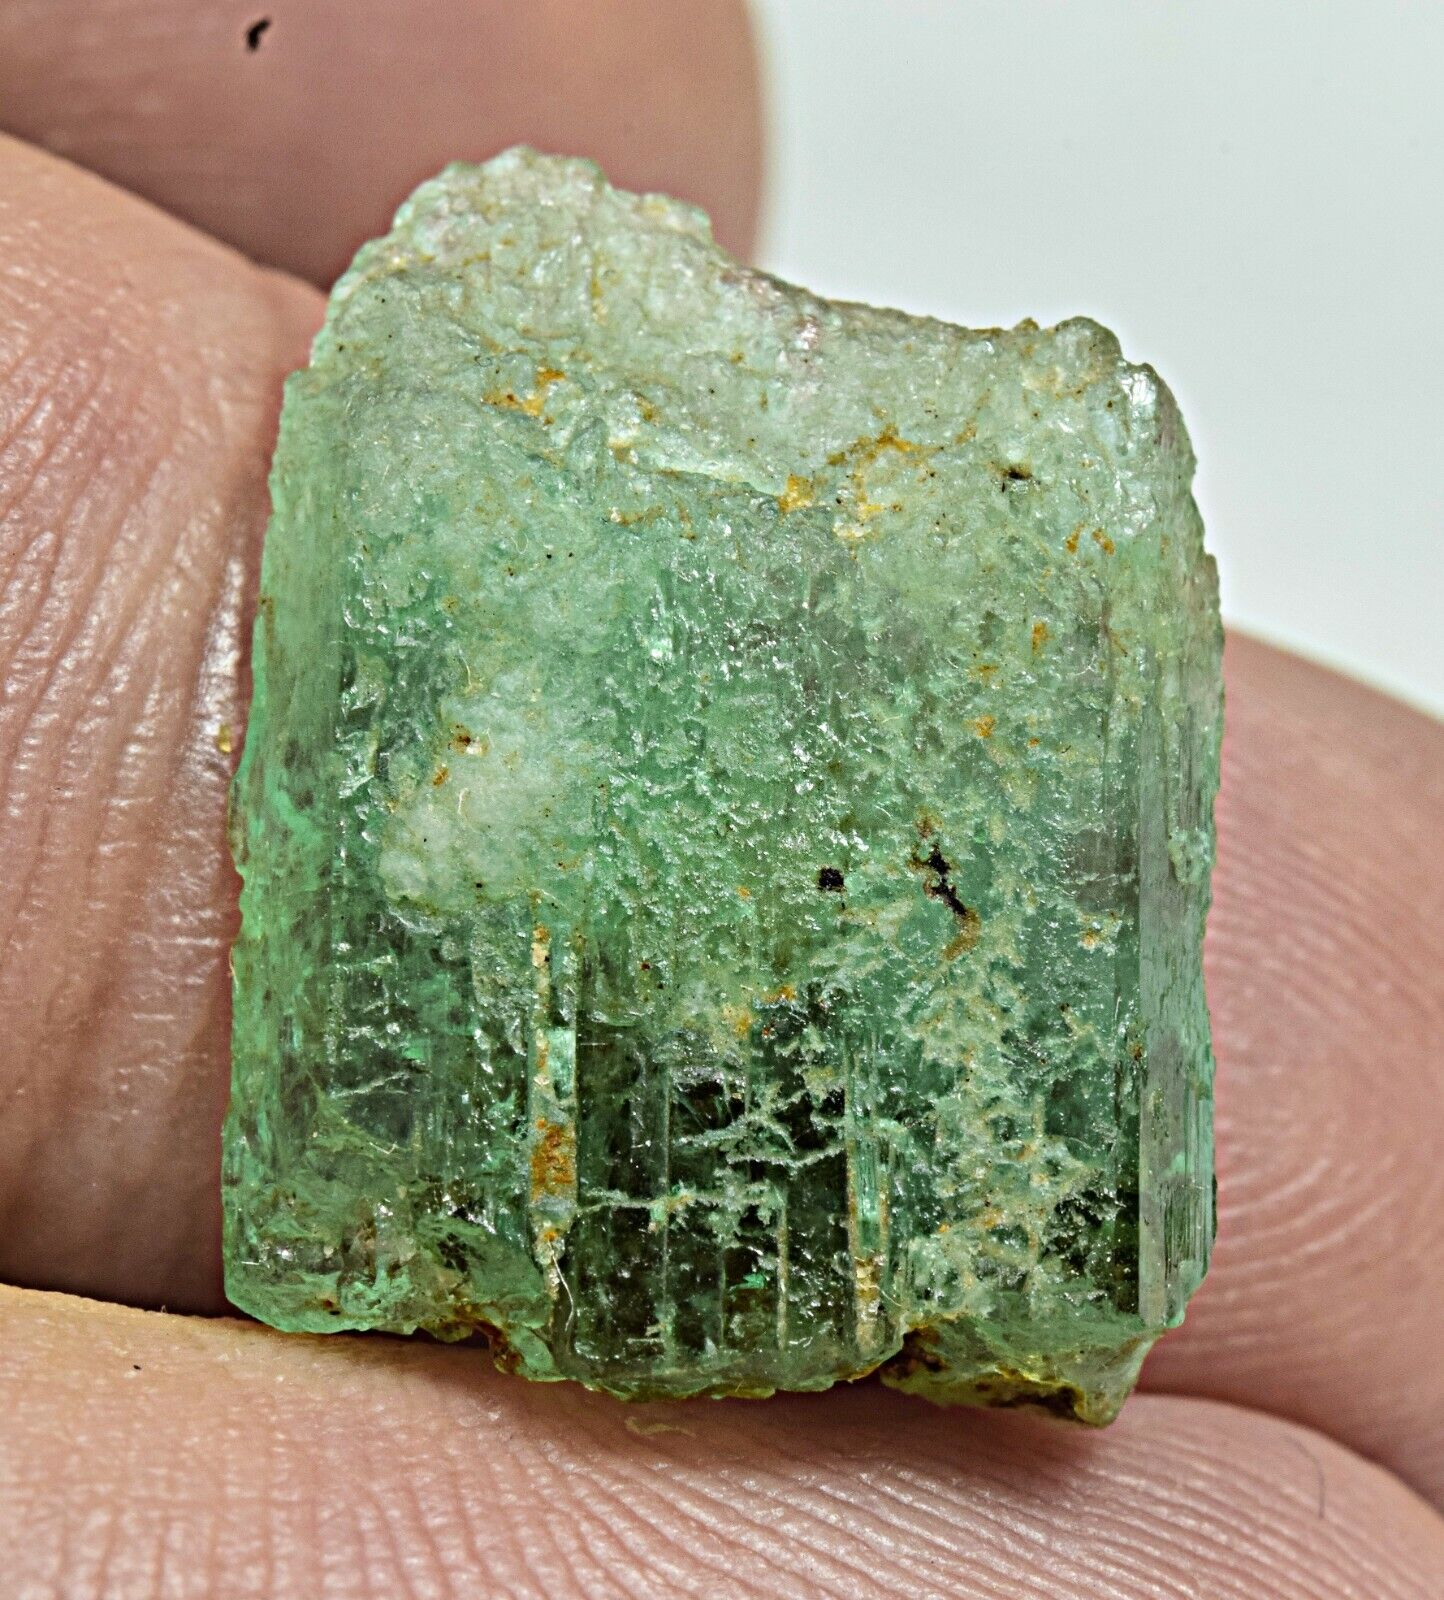 7.5 Carat Green Emerald Crystal  From Panjsher Afghanistan